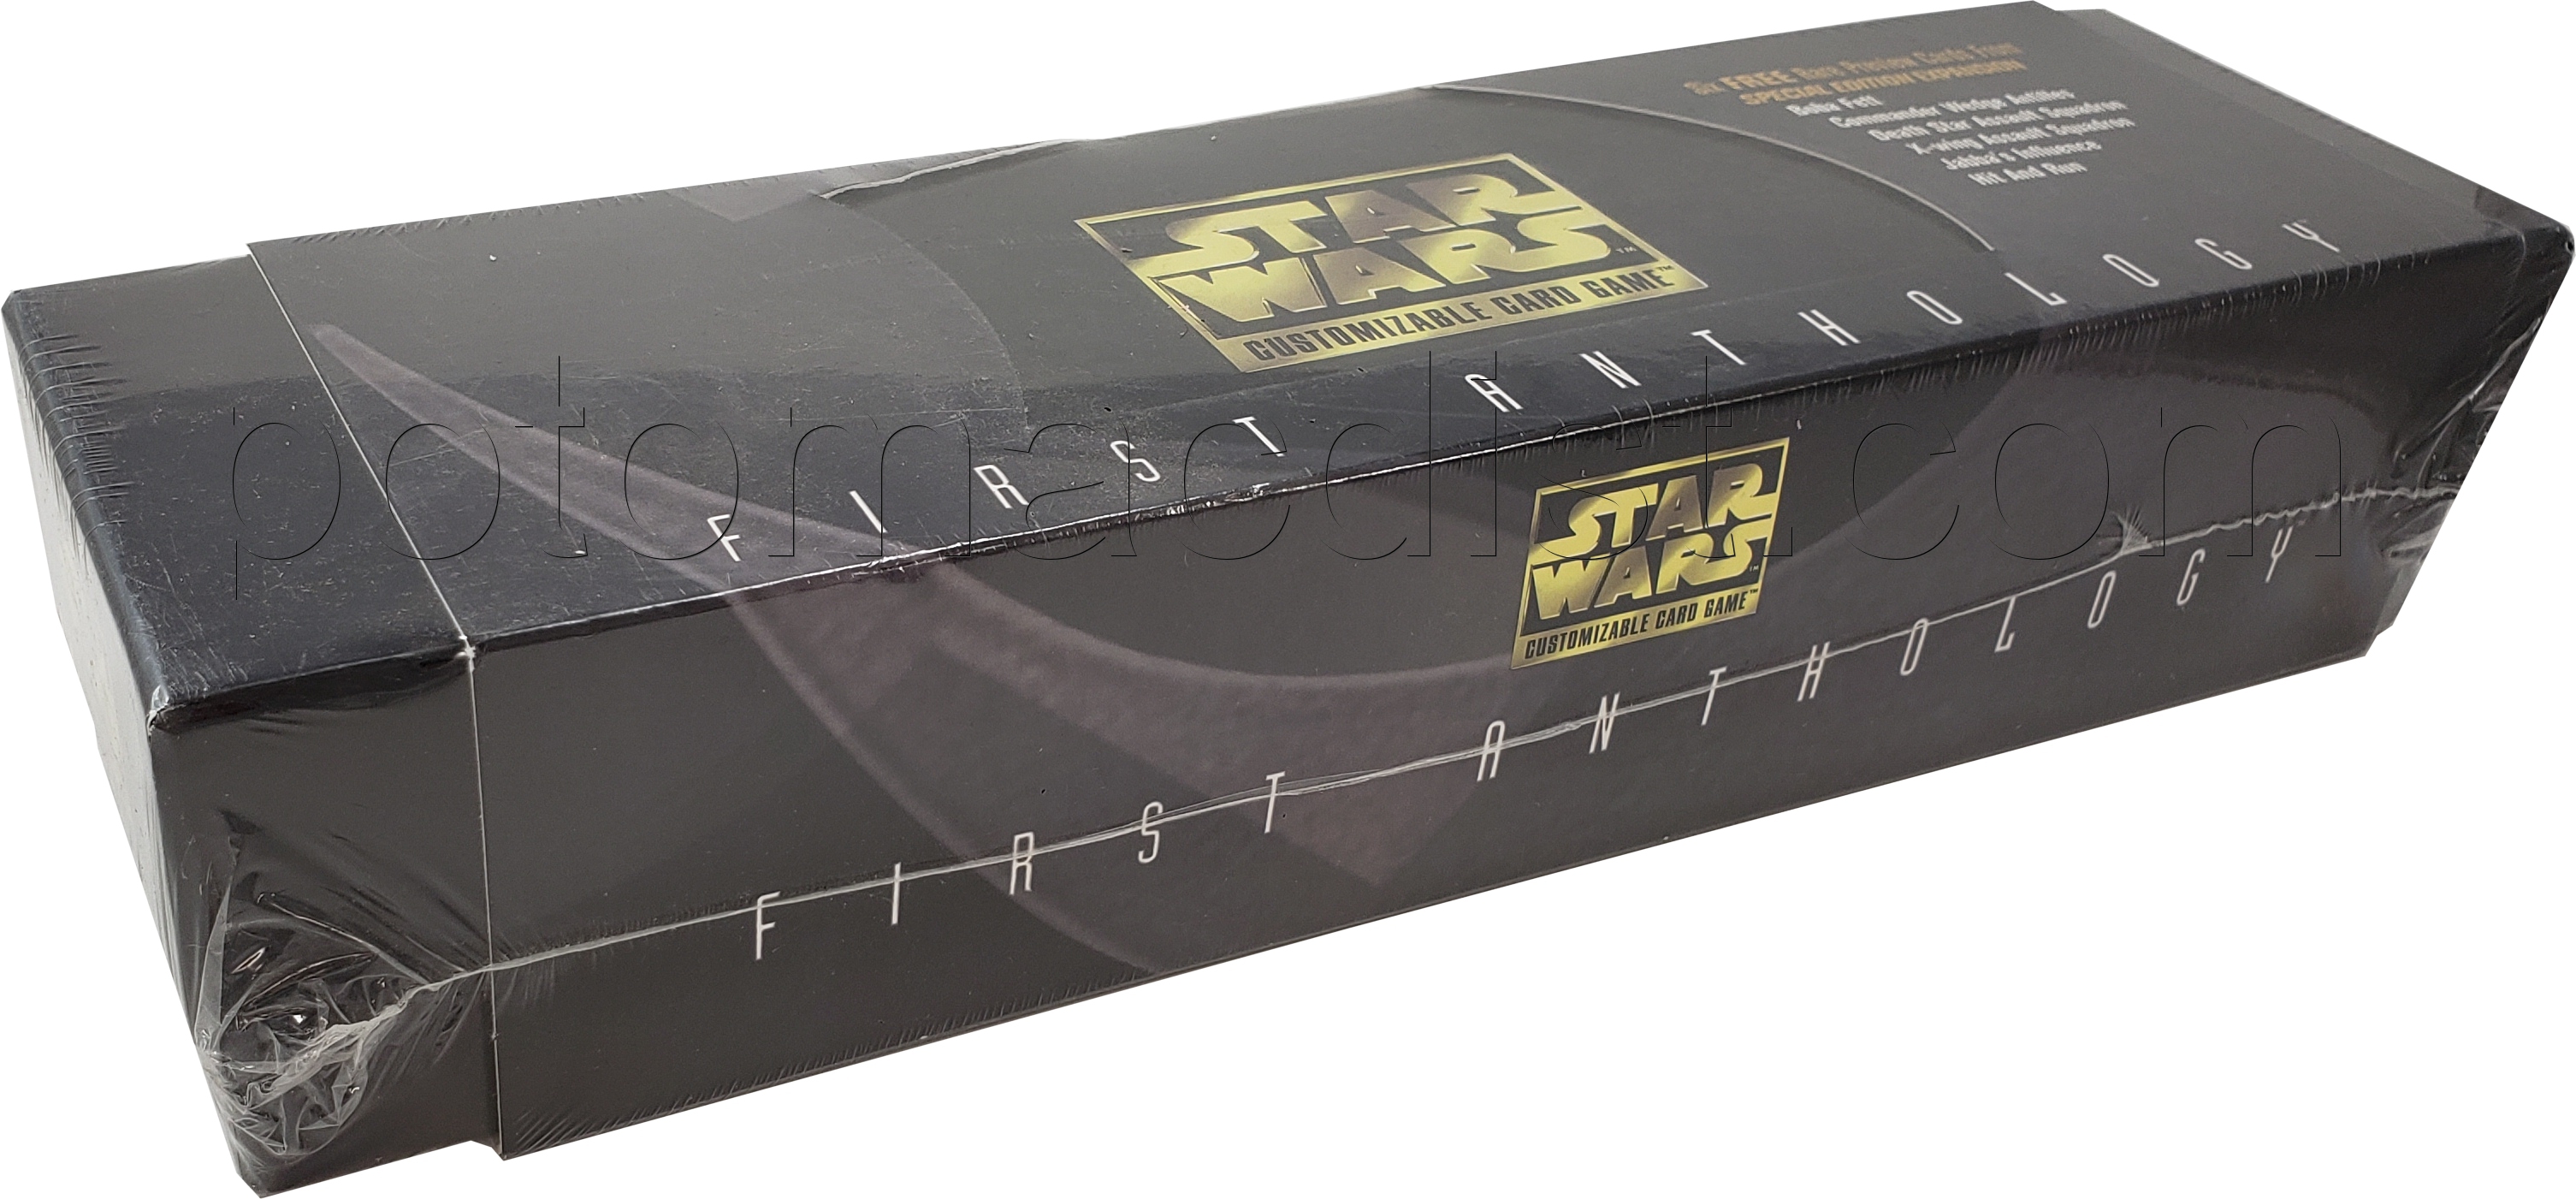 Star Wars CCG Third Anthology by Decipher x1 SEALED BOX 